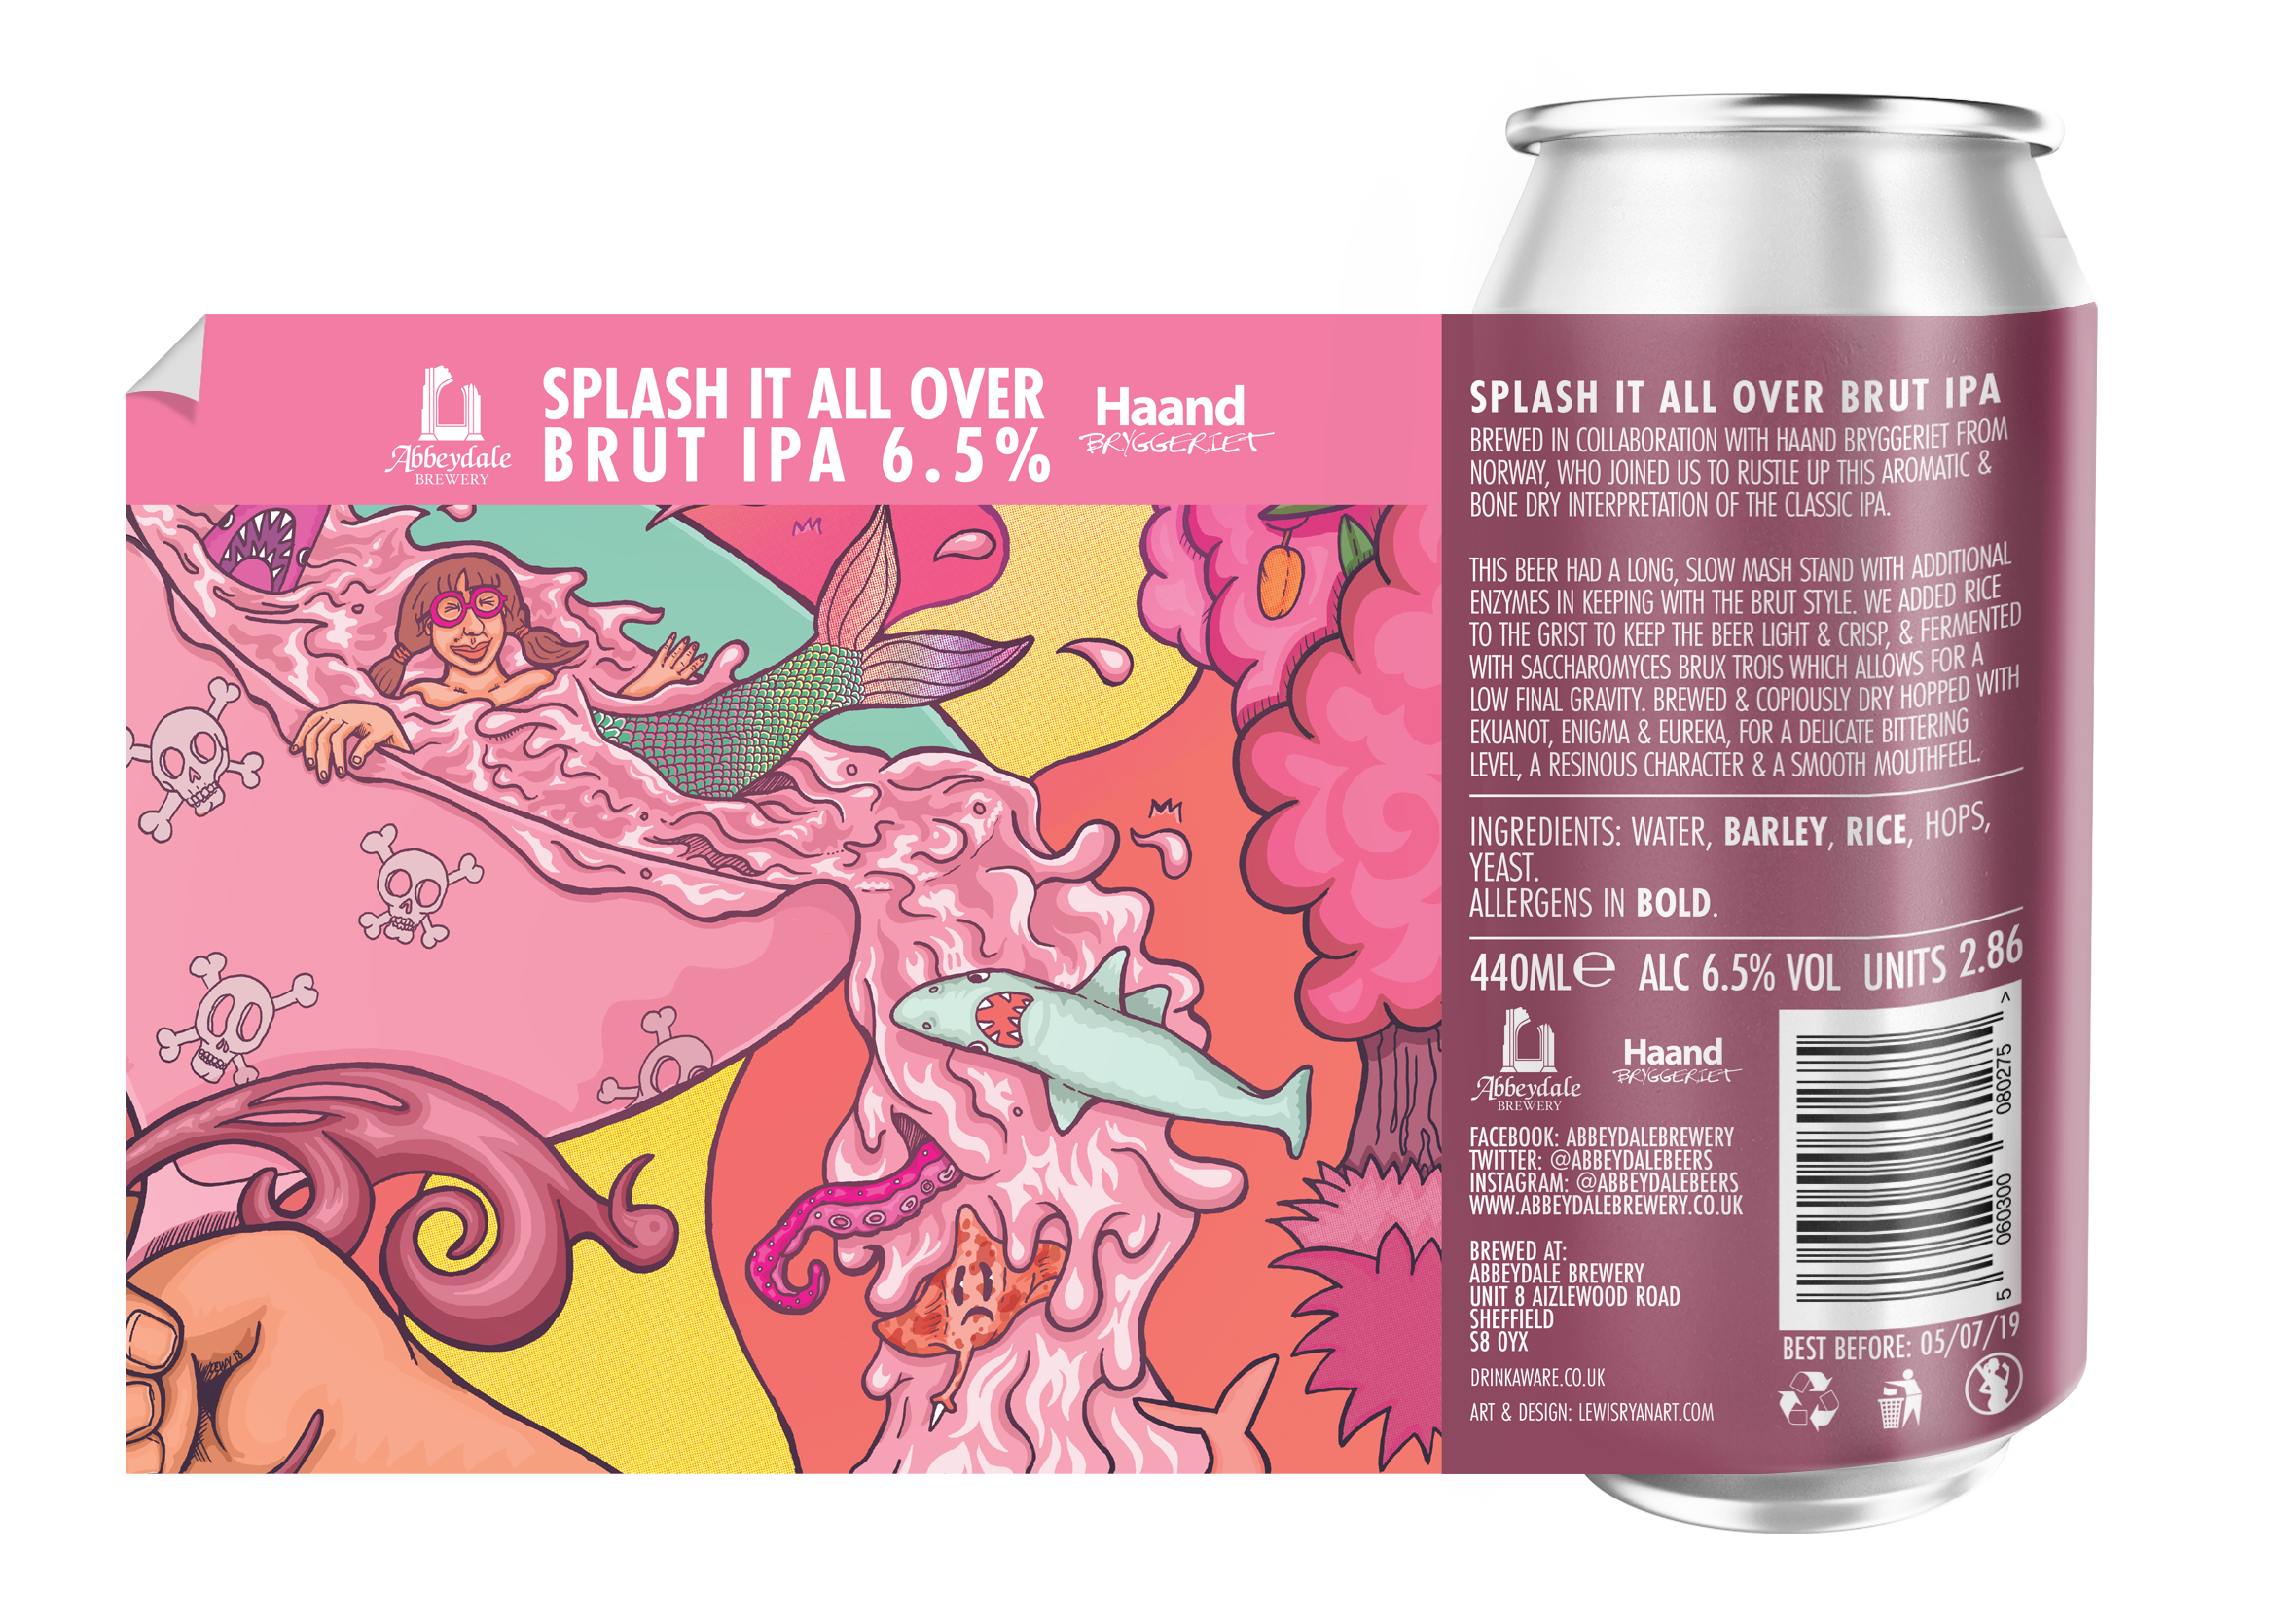 Craft Beer Label Illustration - Abbeydale Brewery - Splash It All Over Brut IPA